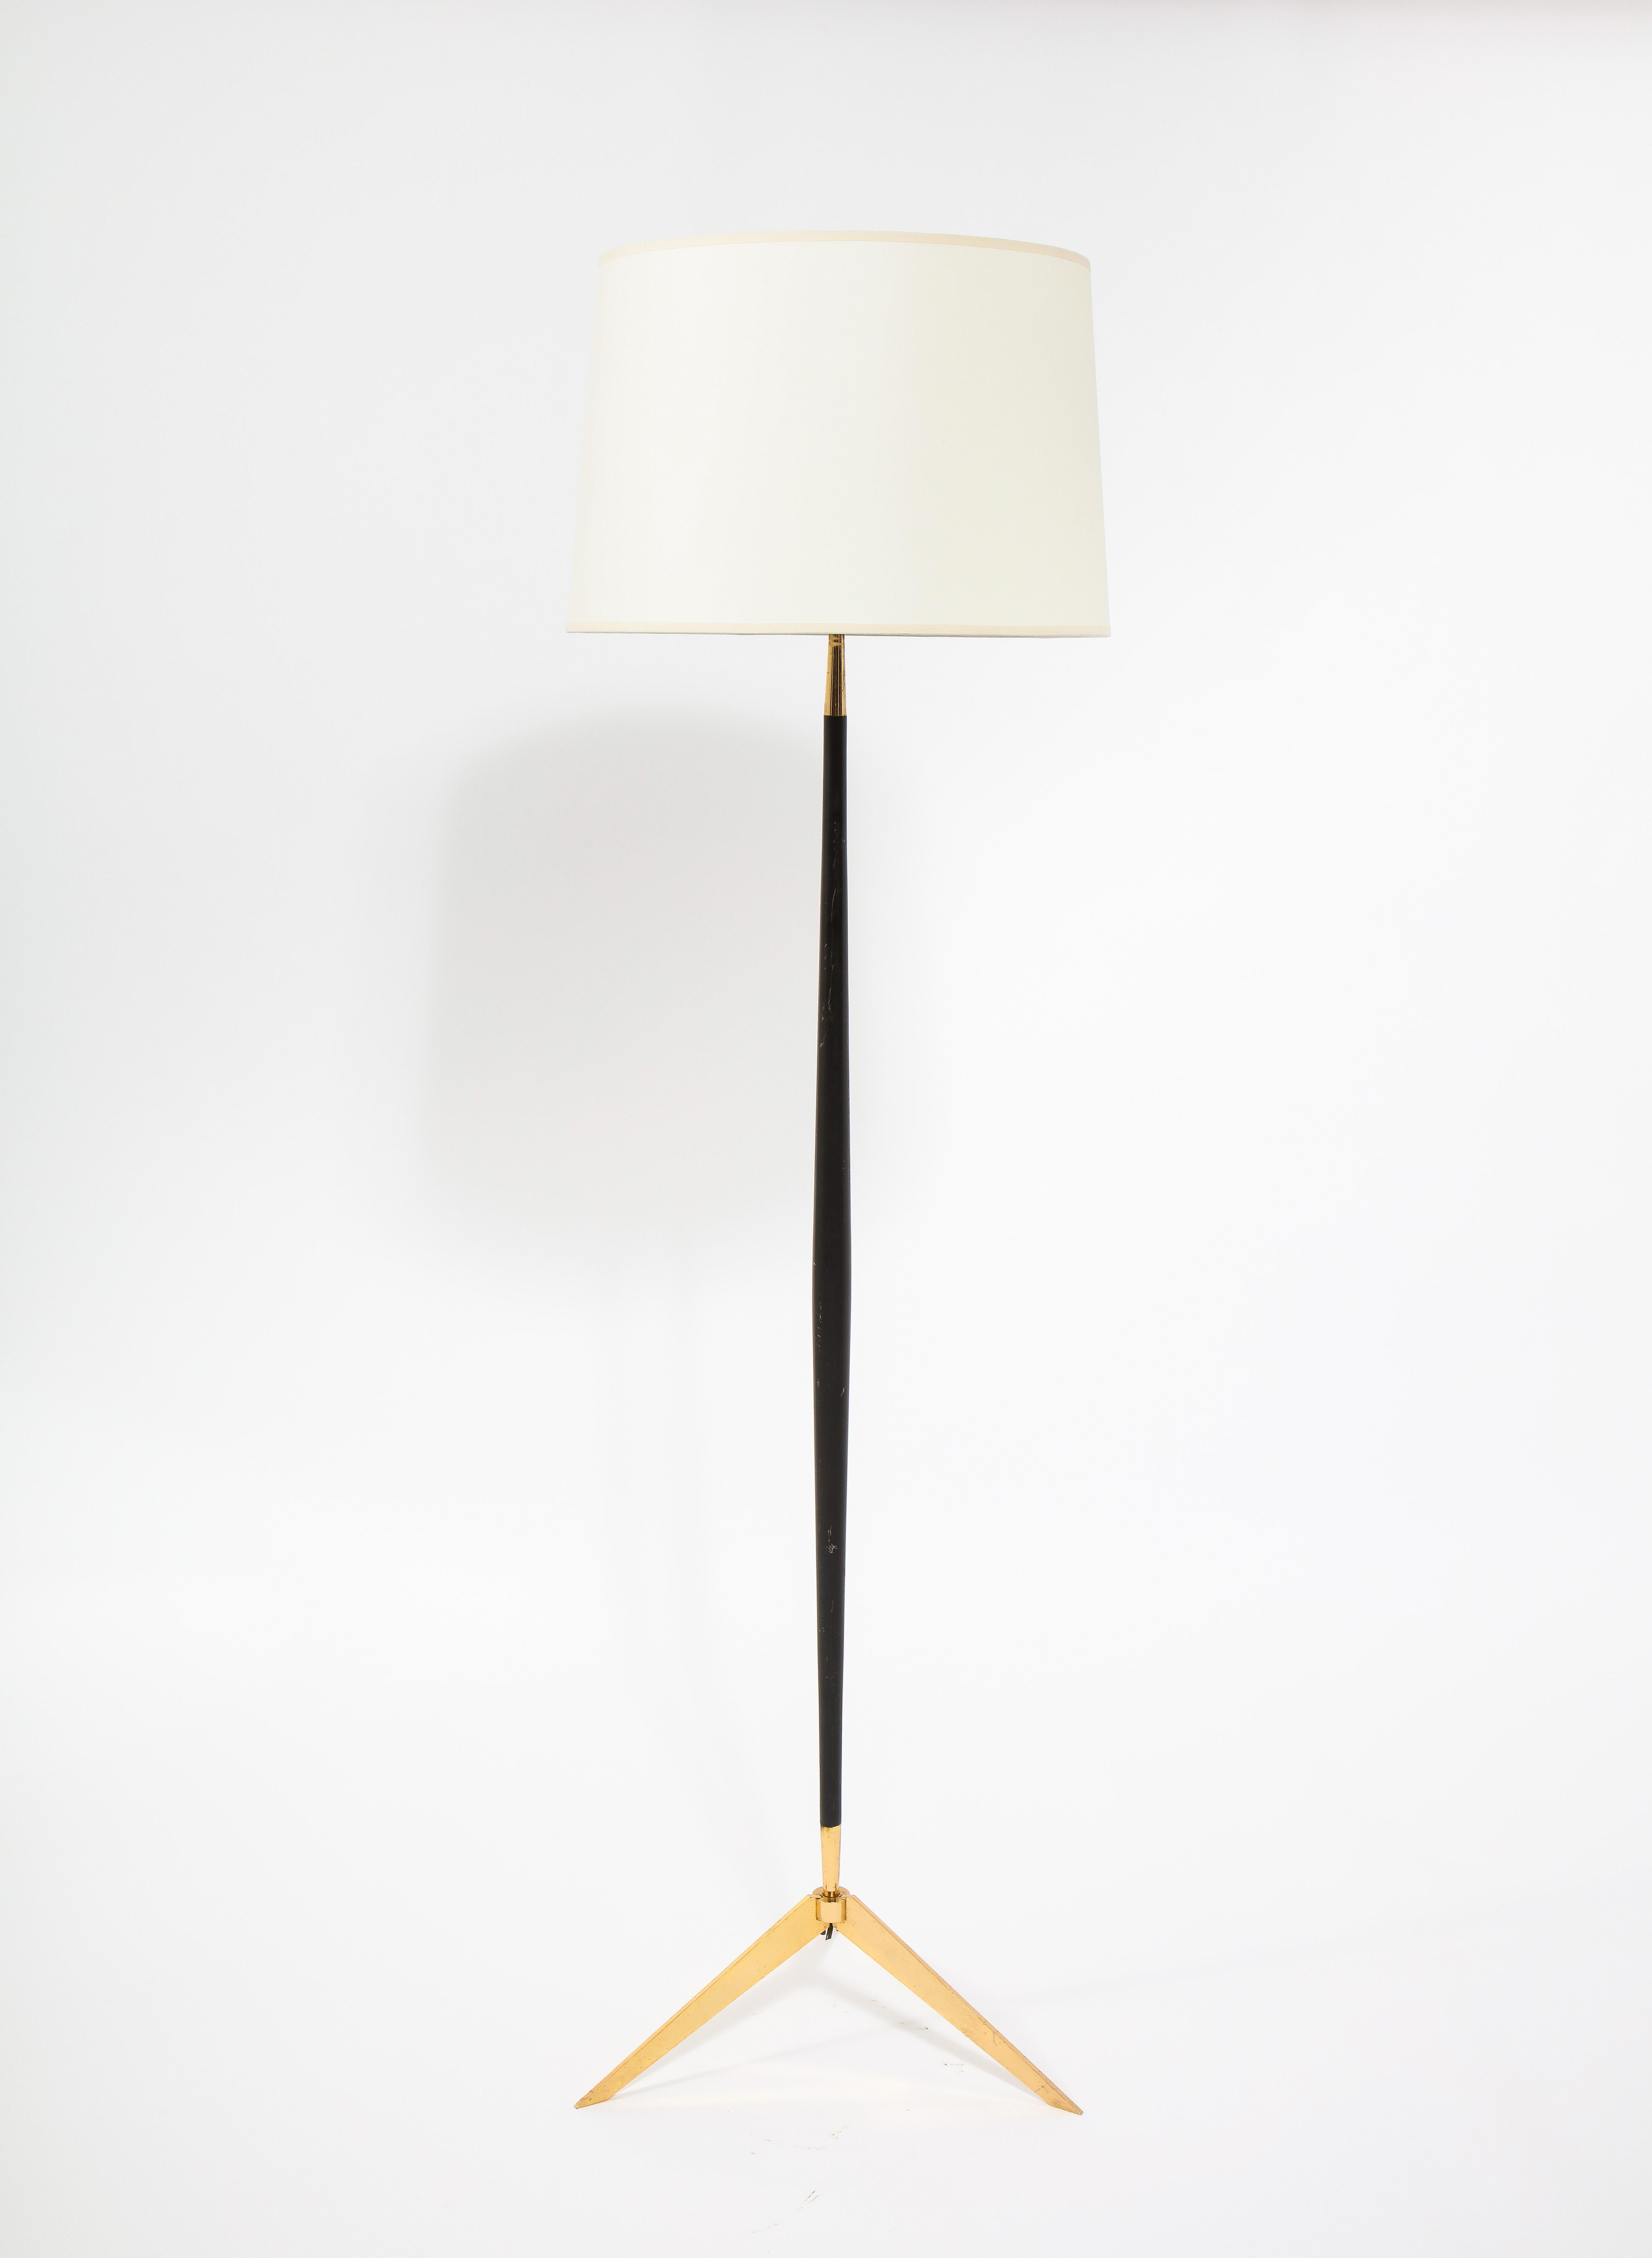 Two tone Arlus tripod standing lamp, the stem is in gunmetal patina while the base is gilt brass. Shade for photographic purposes.